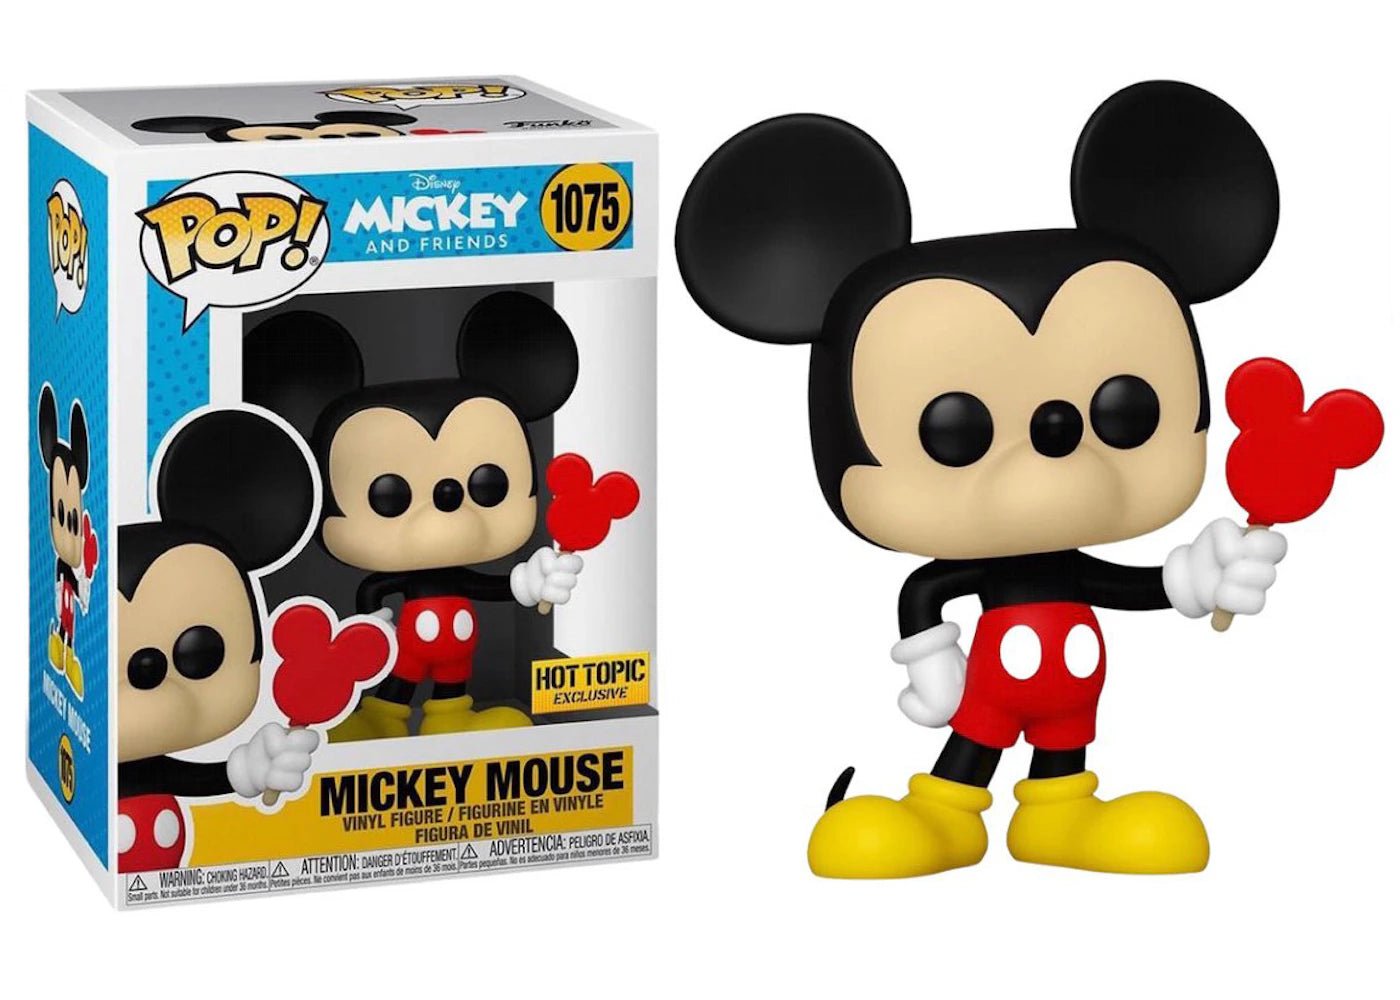 Funko POP Disney Mickey And Friends Mickey Mouse Hot Topic 1075 - NERD BLVD